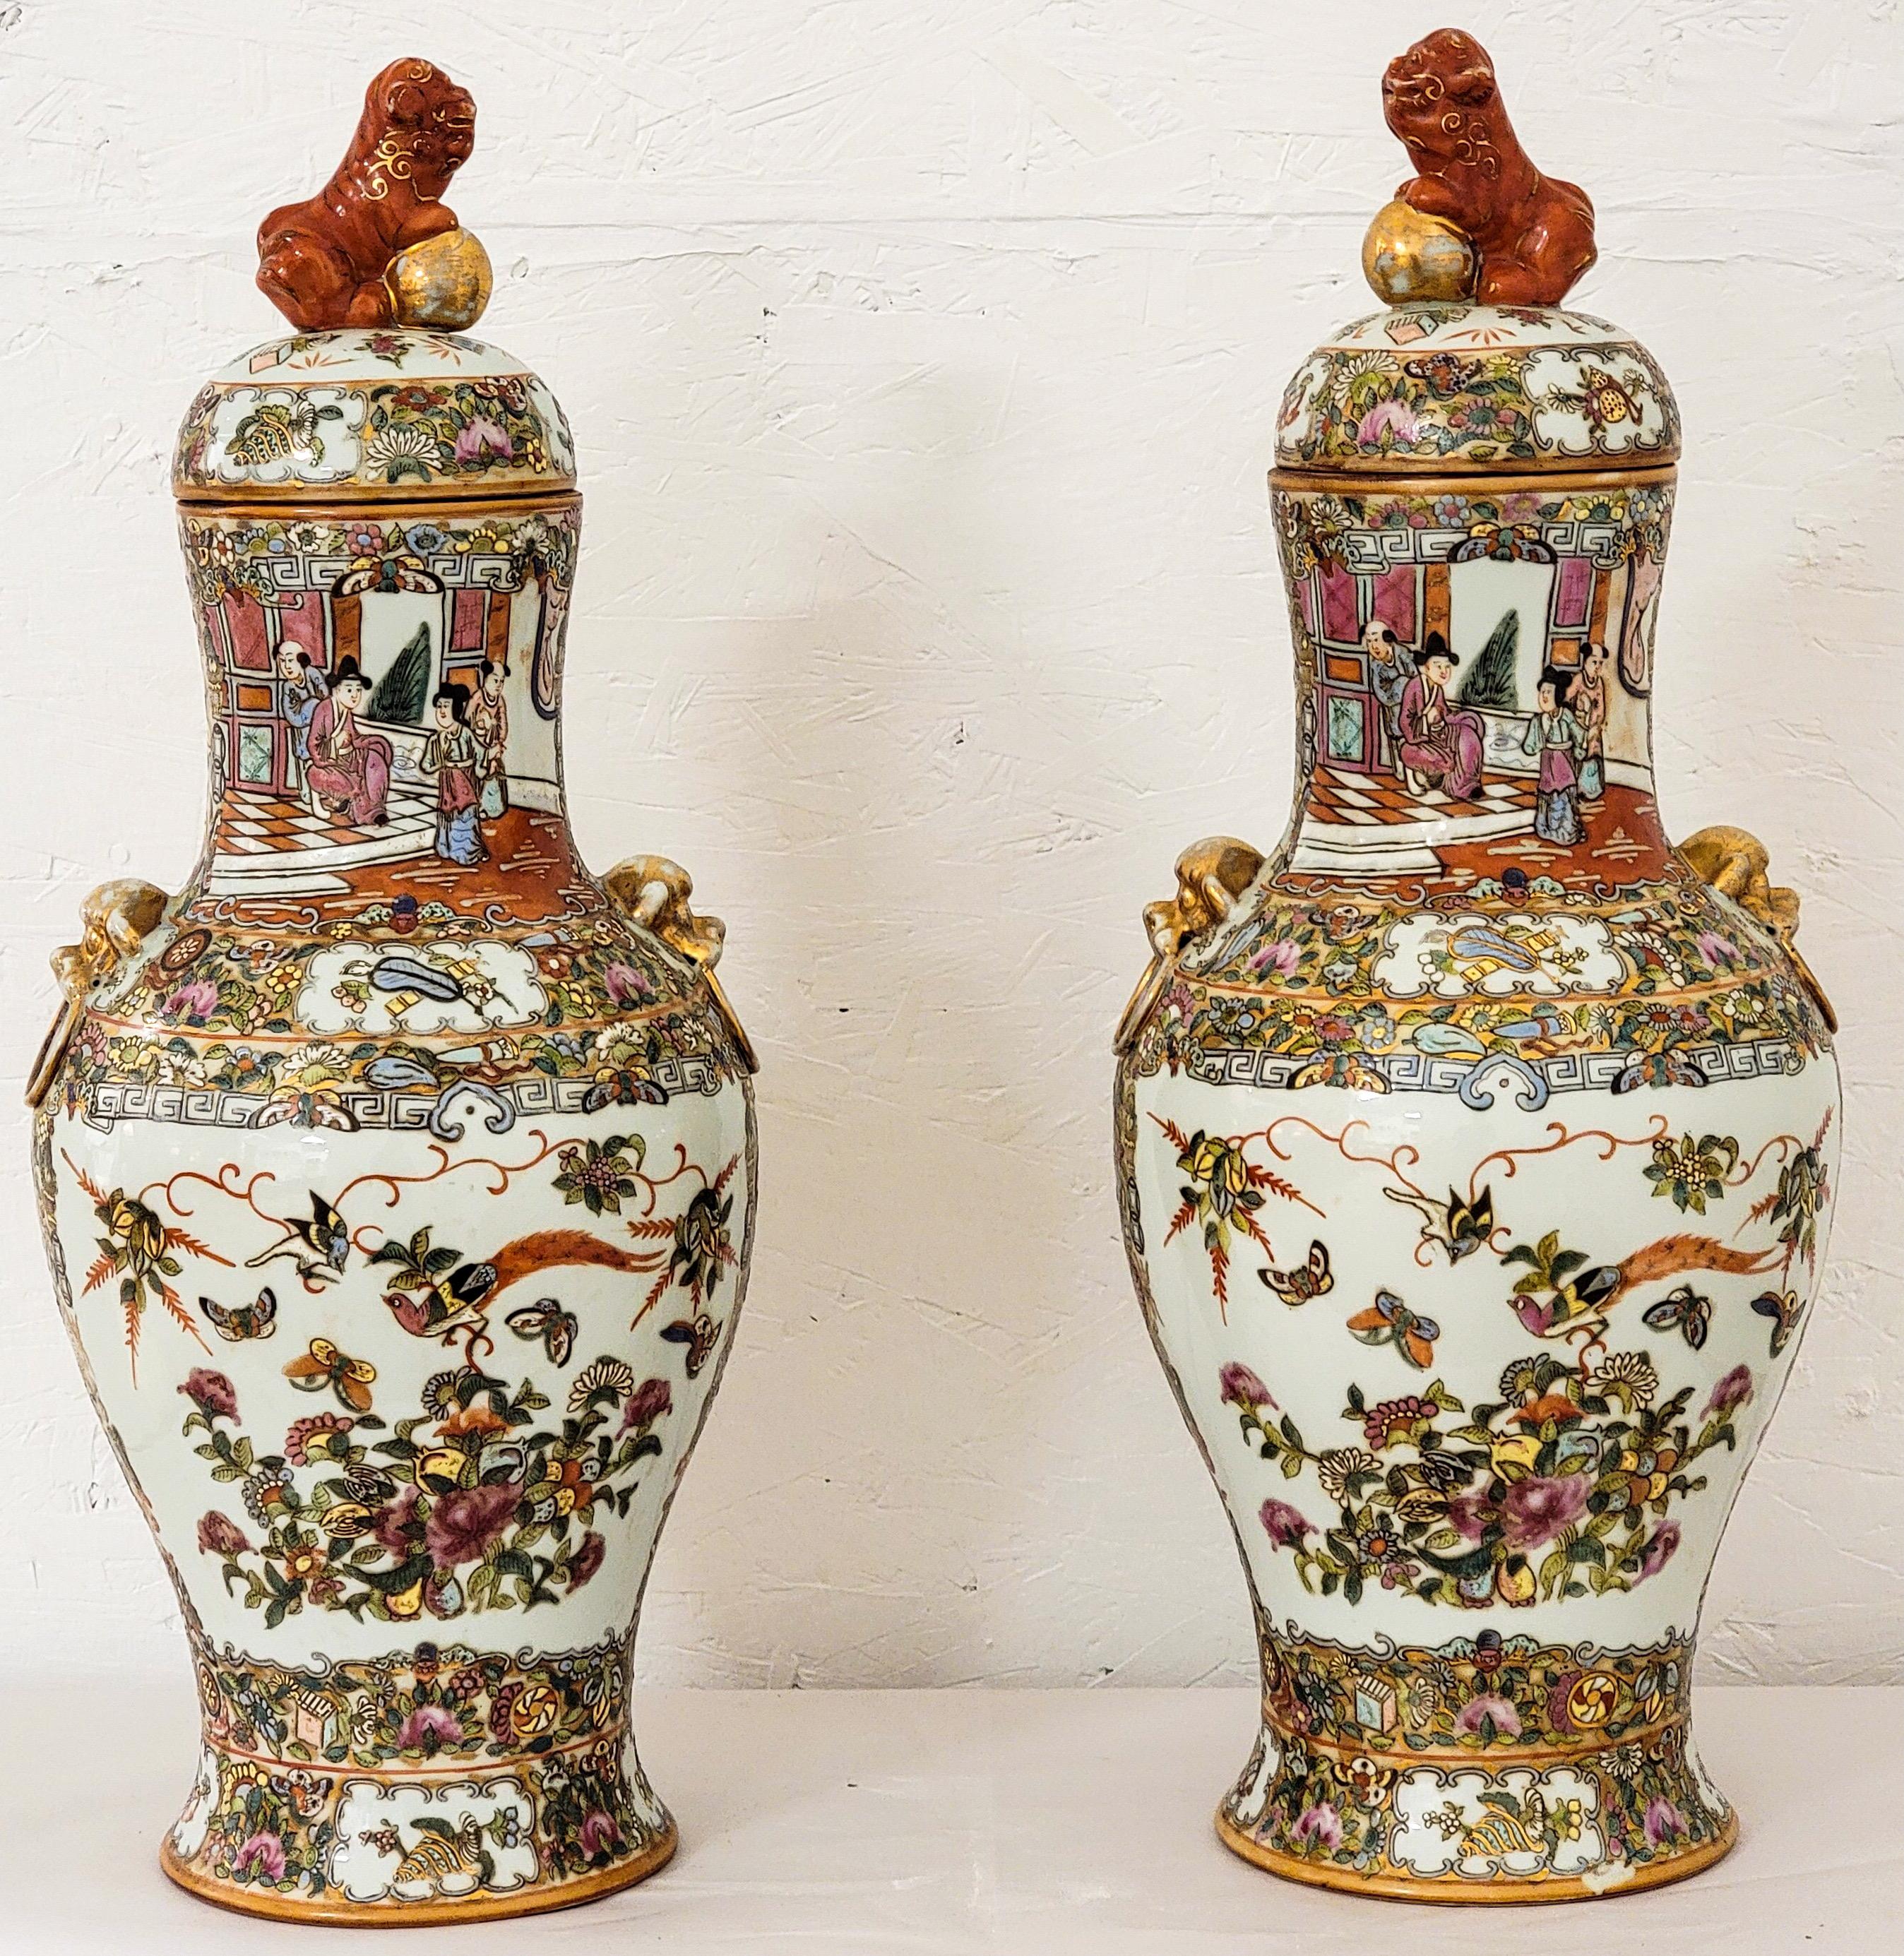 This is a very decorative pair of Asian ginger jars with vibrant colors and pastoral scenes. They have gilt accents and foo dog finials. They are marked and show some lite age wear.